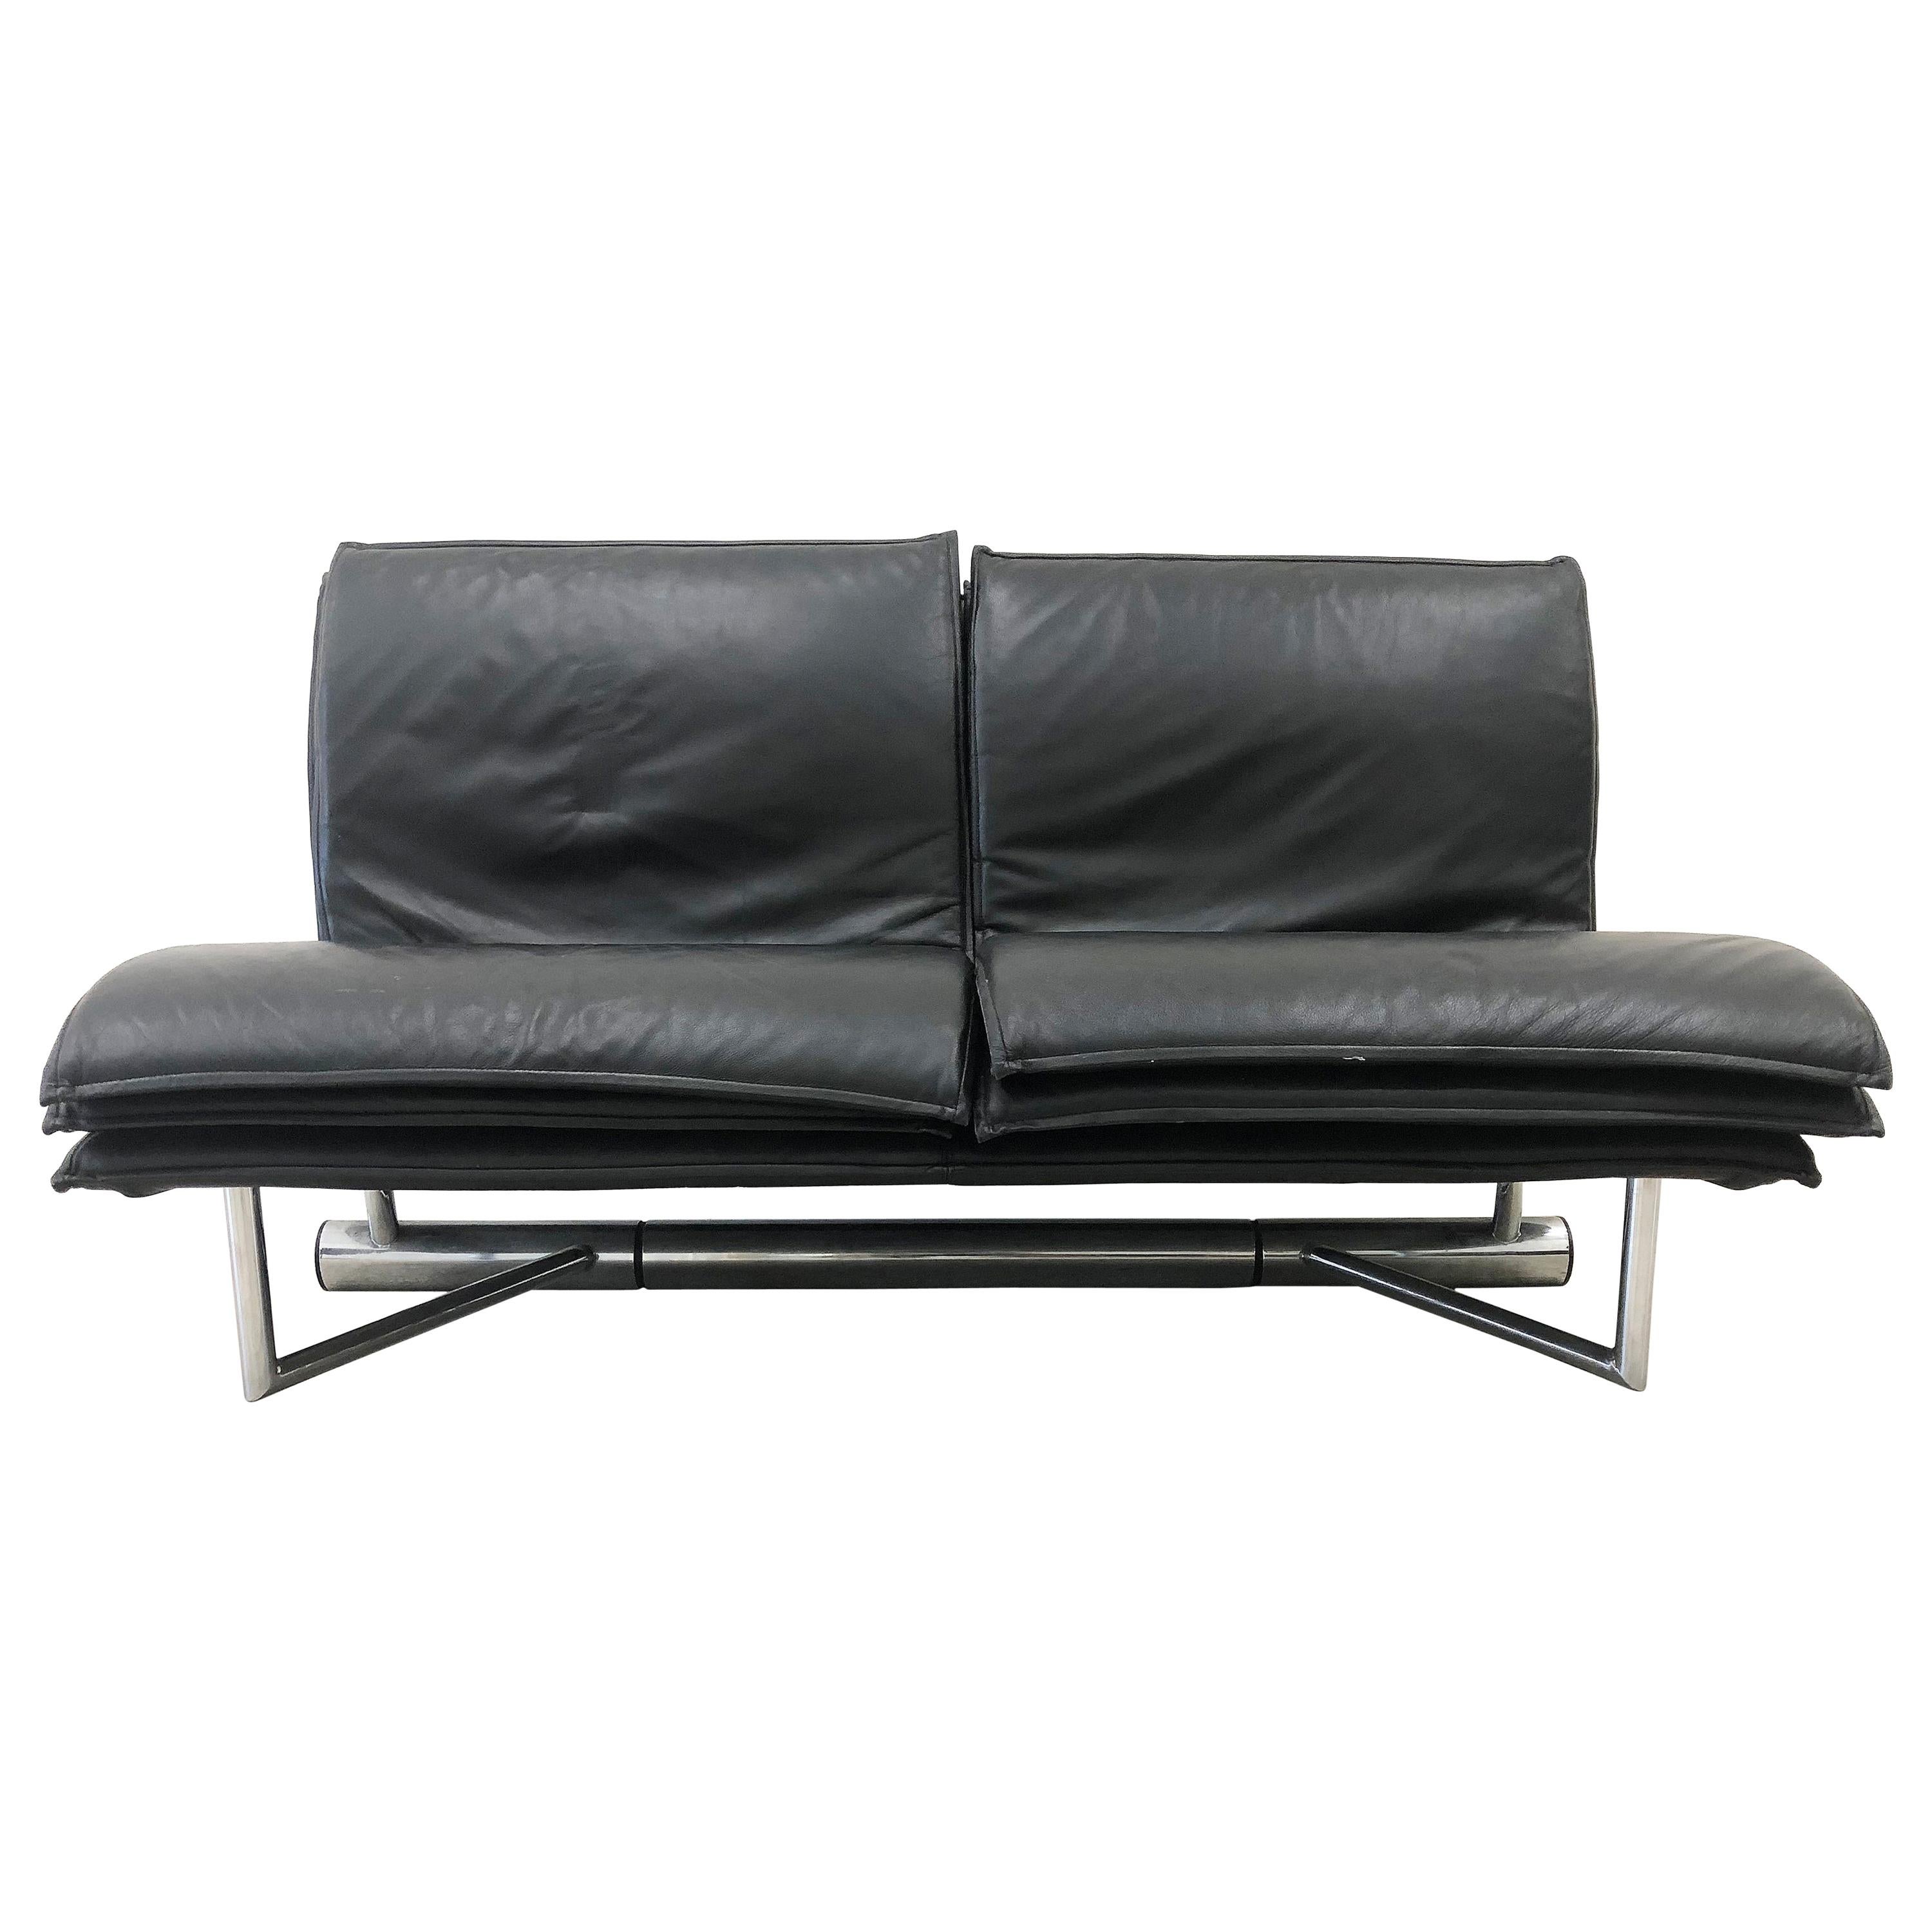 Saporiti Italia Padded Leather and Stainless Steel Sofa For Sale